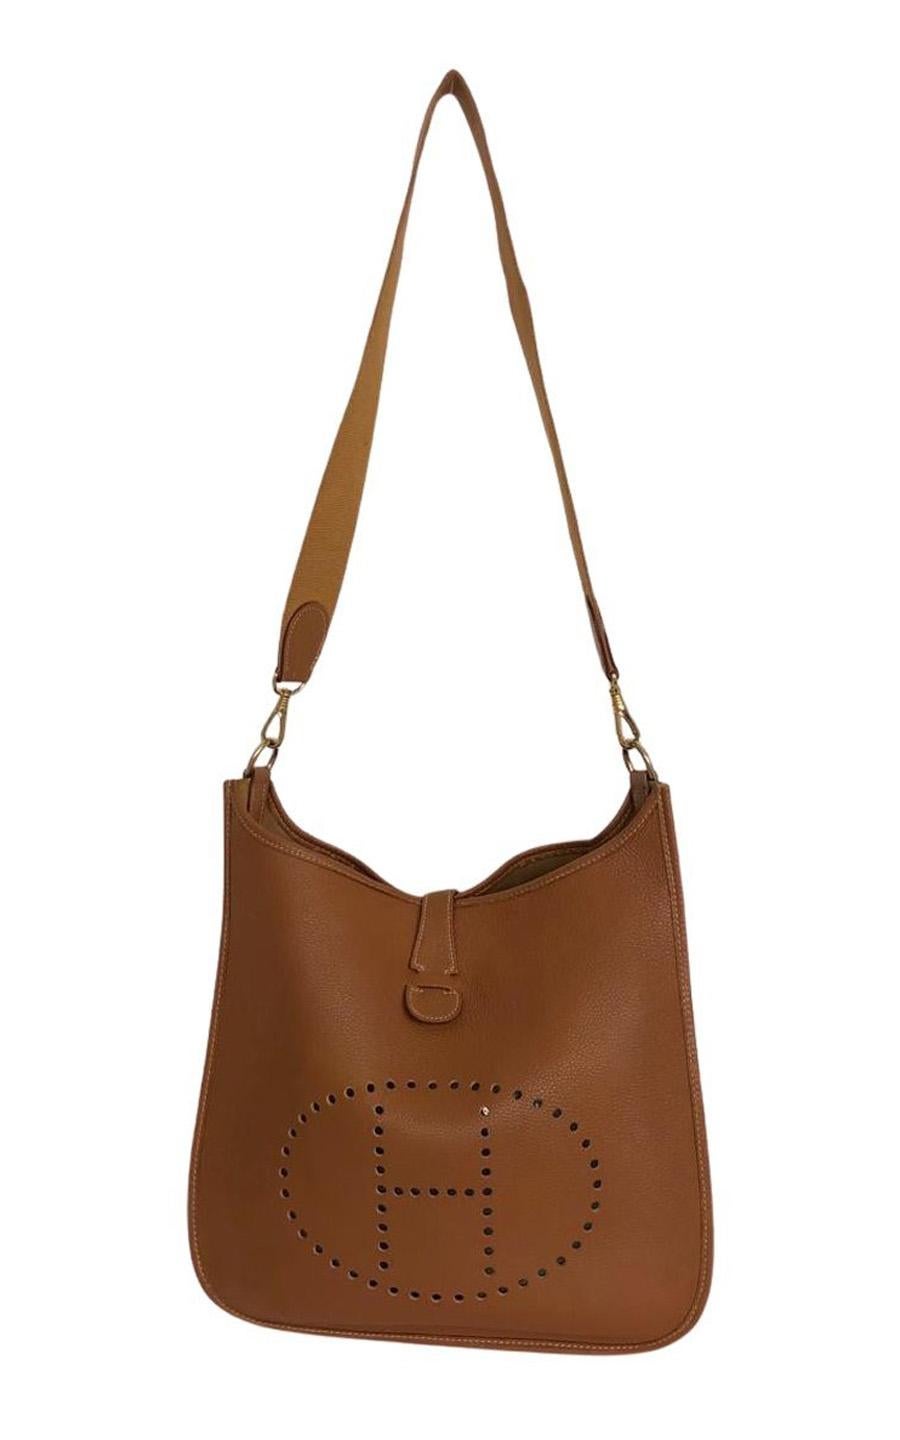 Hermès Evelyne GM I (first generation) in cognac colored leather. The hardware is gold-colored. The bag closes with a push button and has no pockets on the inside. It can be worn on the shoulder or as a crossbody bag. The shoulder strap is made of